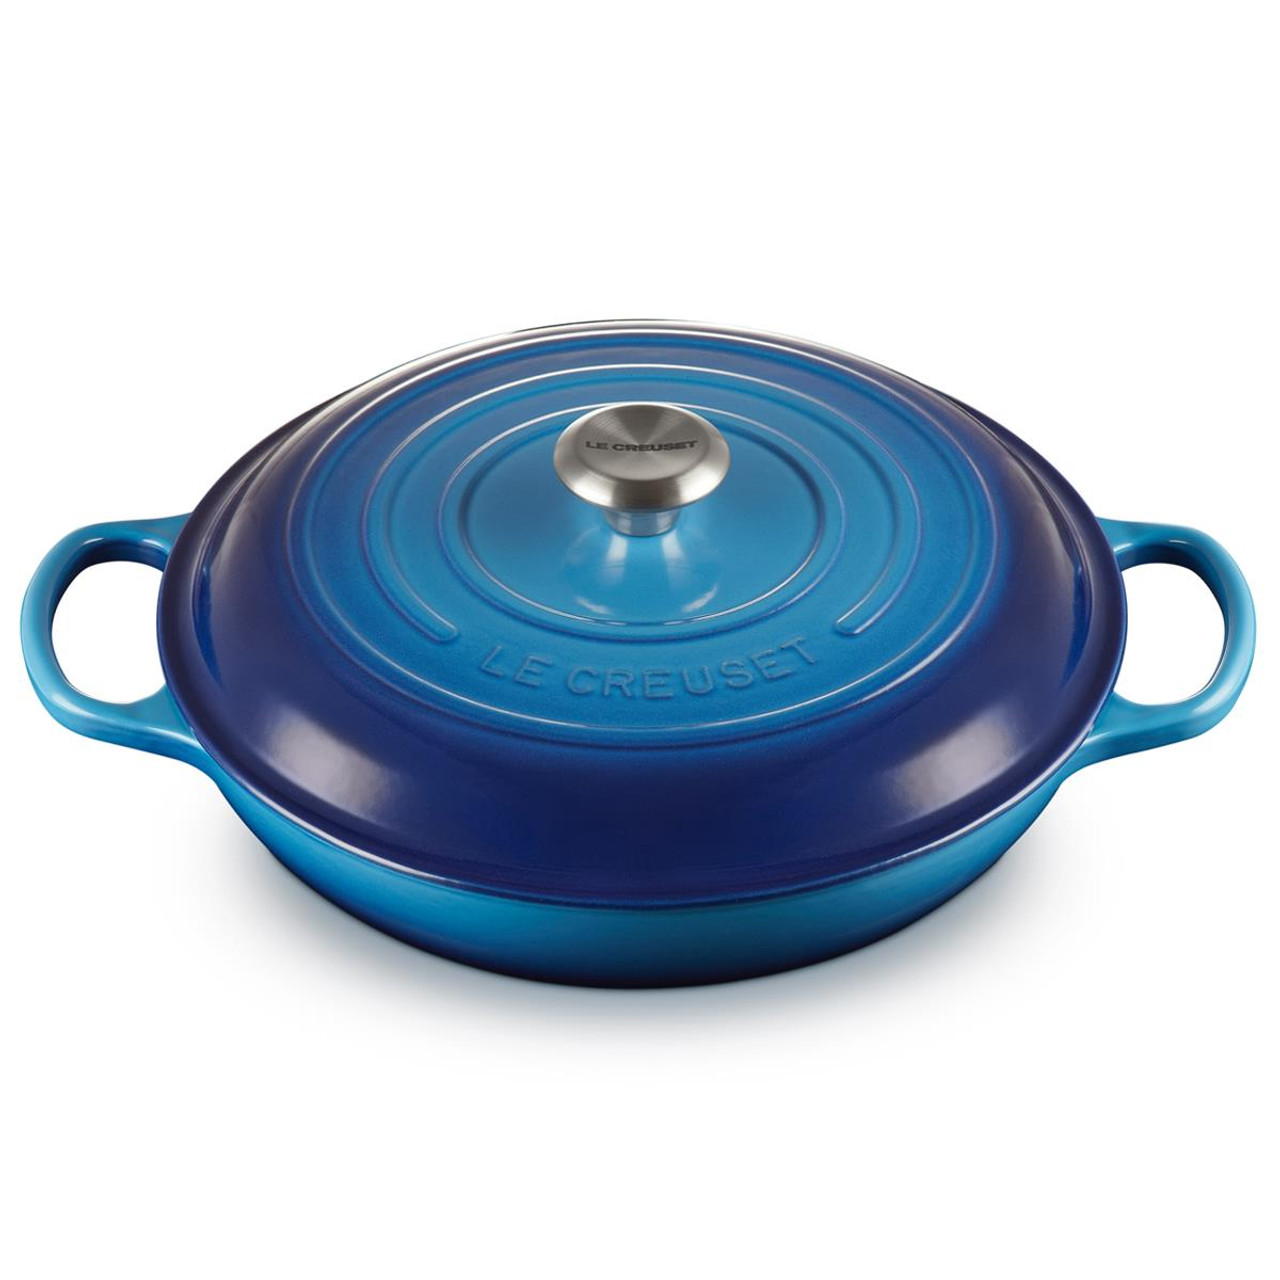 How many handles does the Le Creuset shallow casserole dish have?